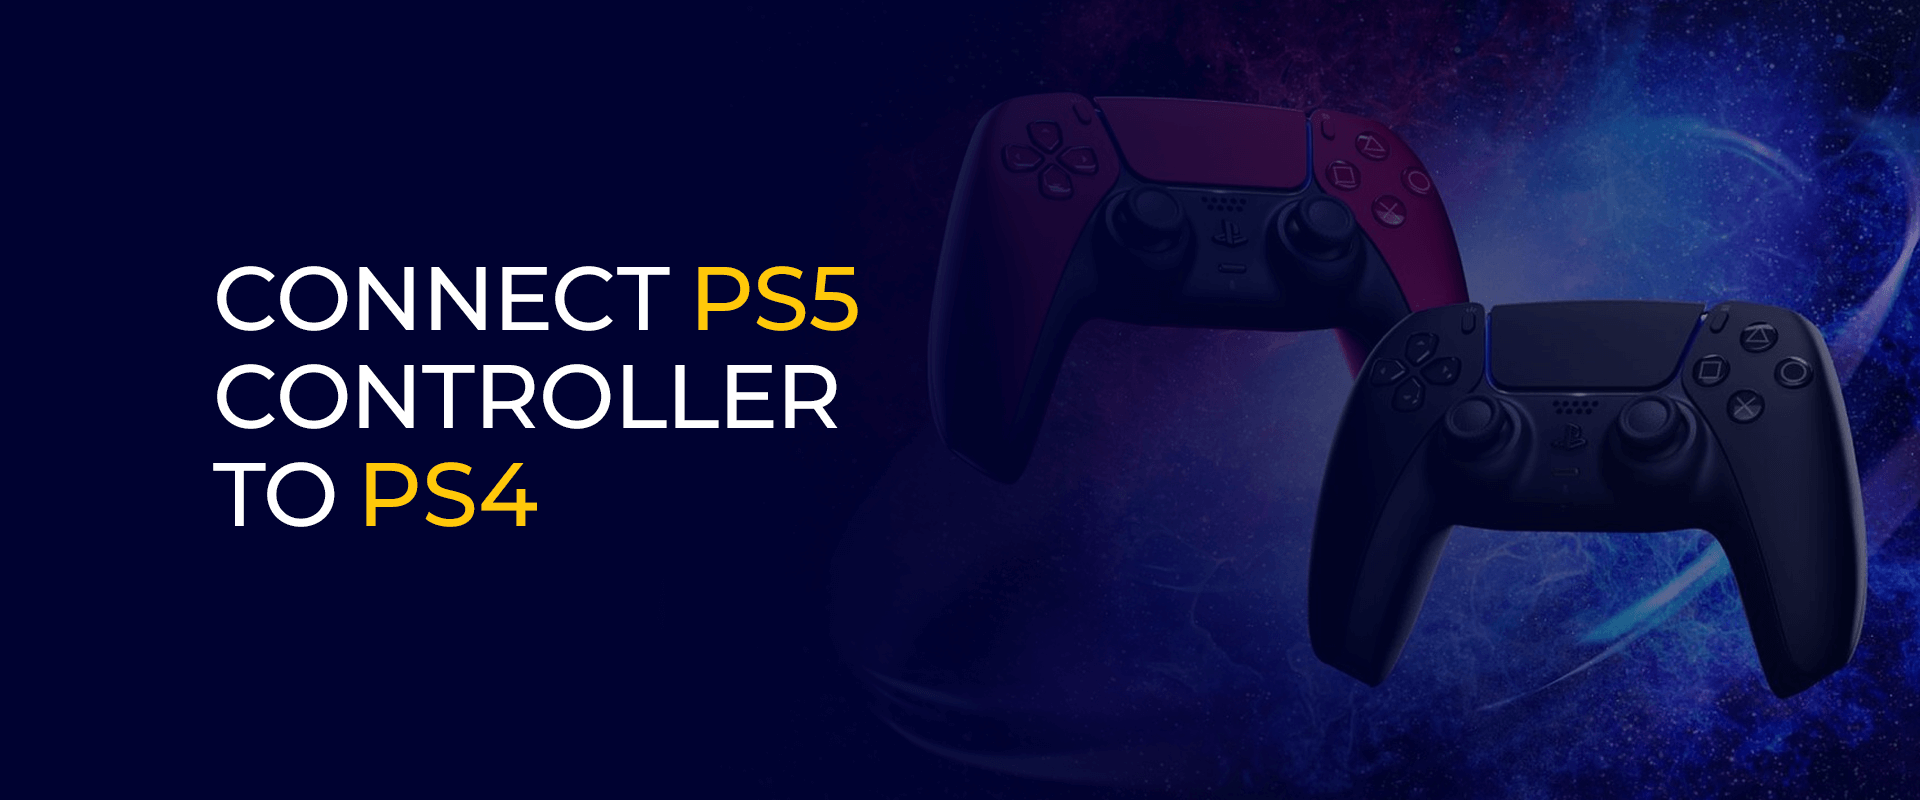 Connect PS5 Controller op PS4